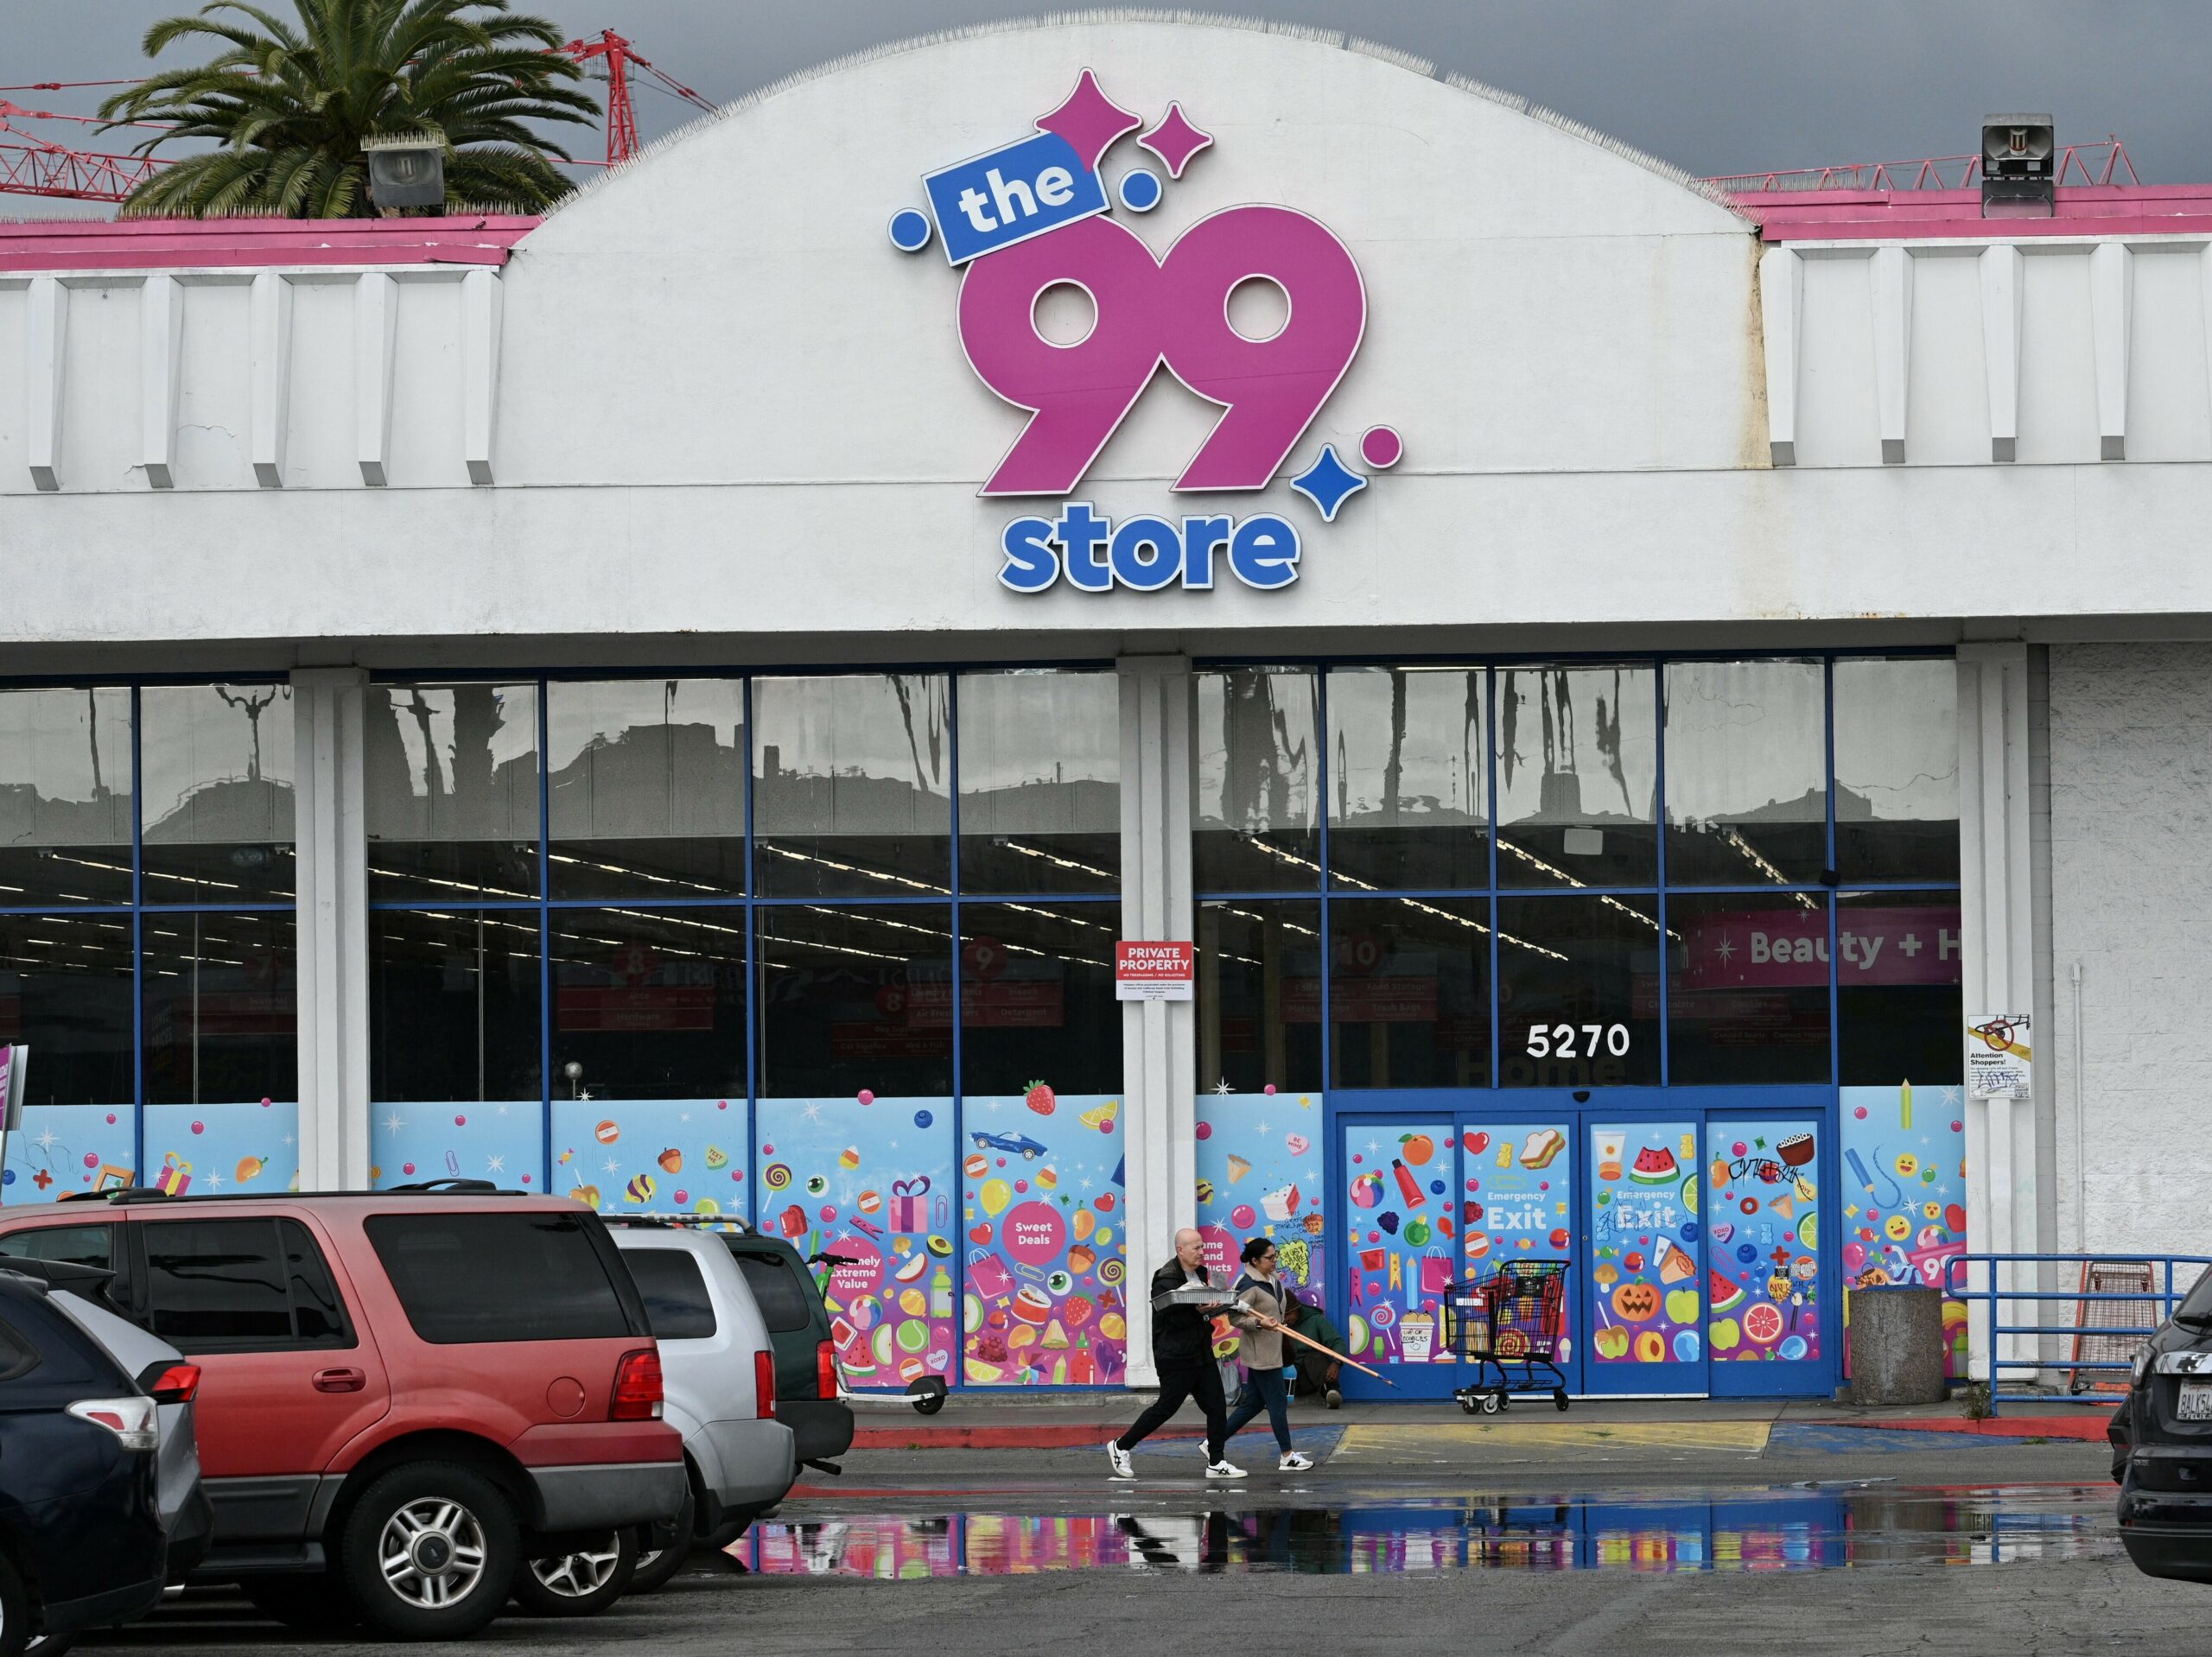 99 Cents stores to close down all 371 locations